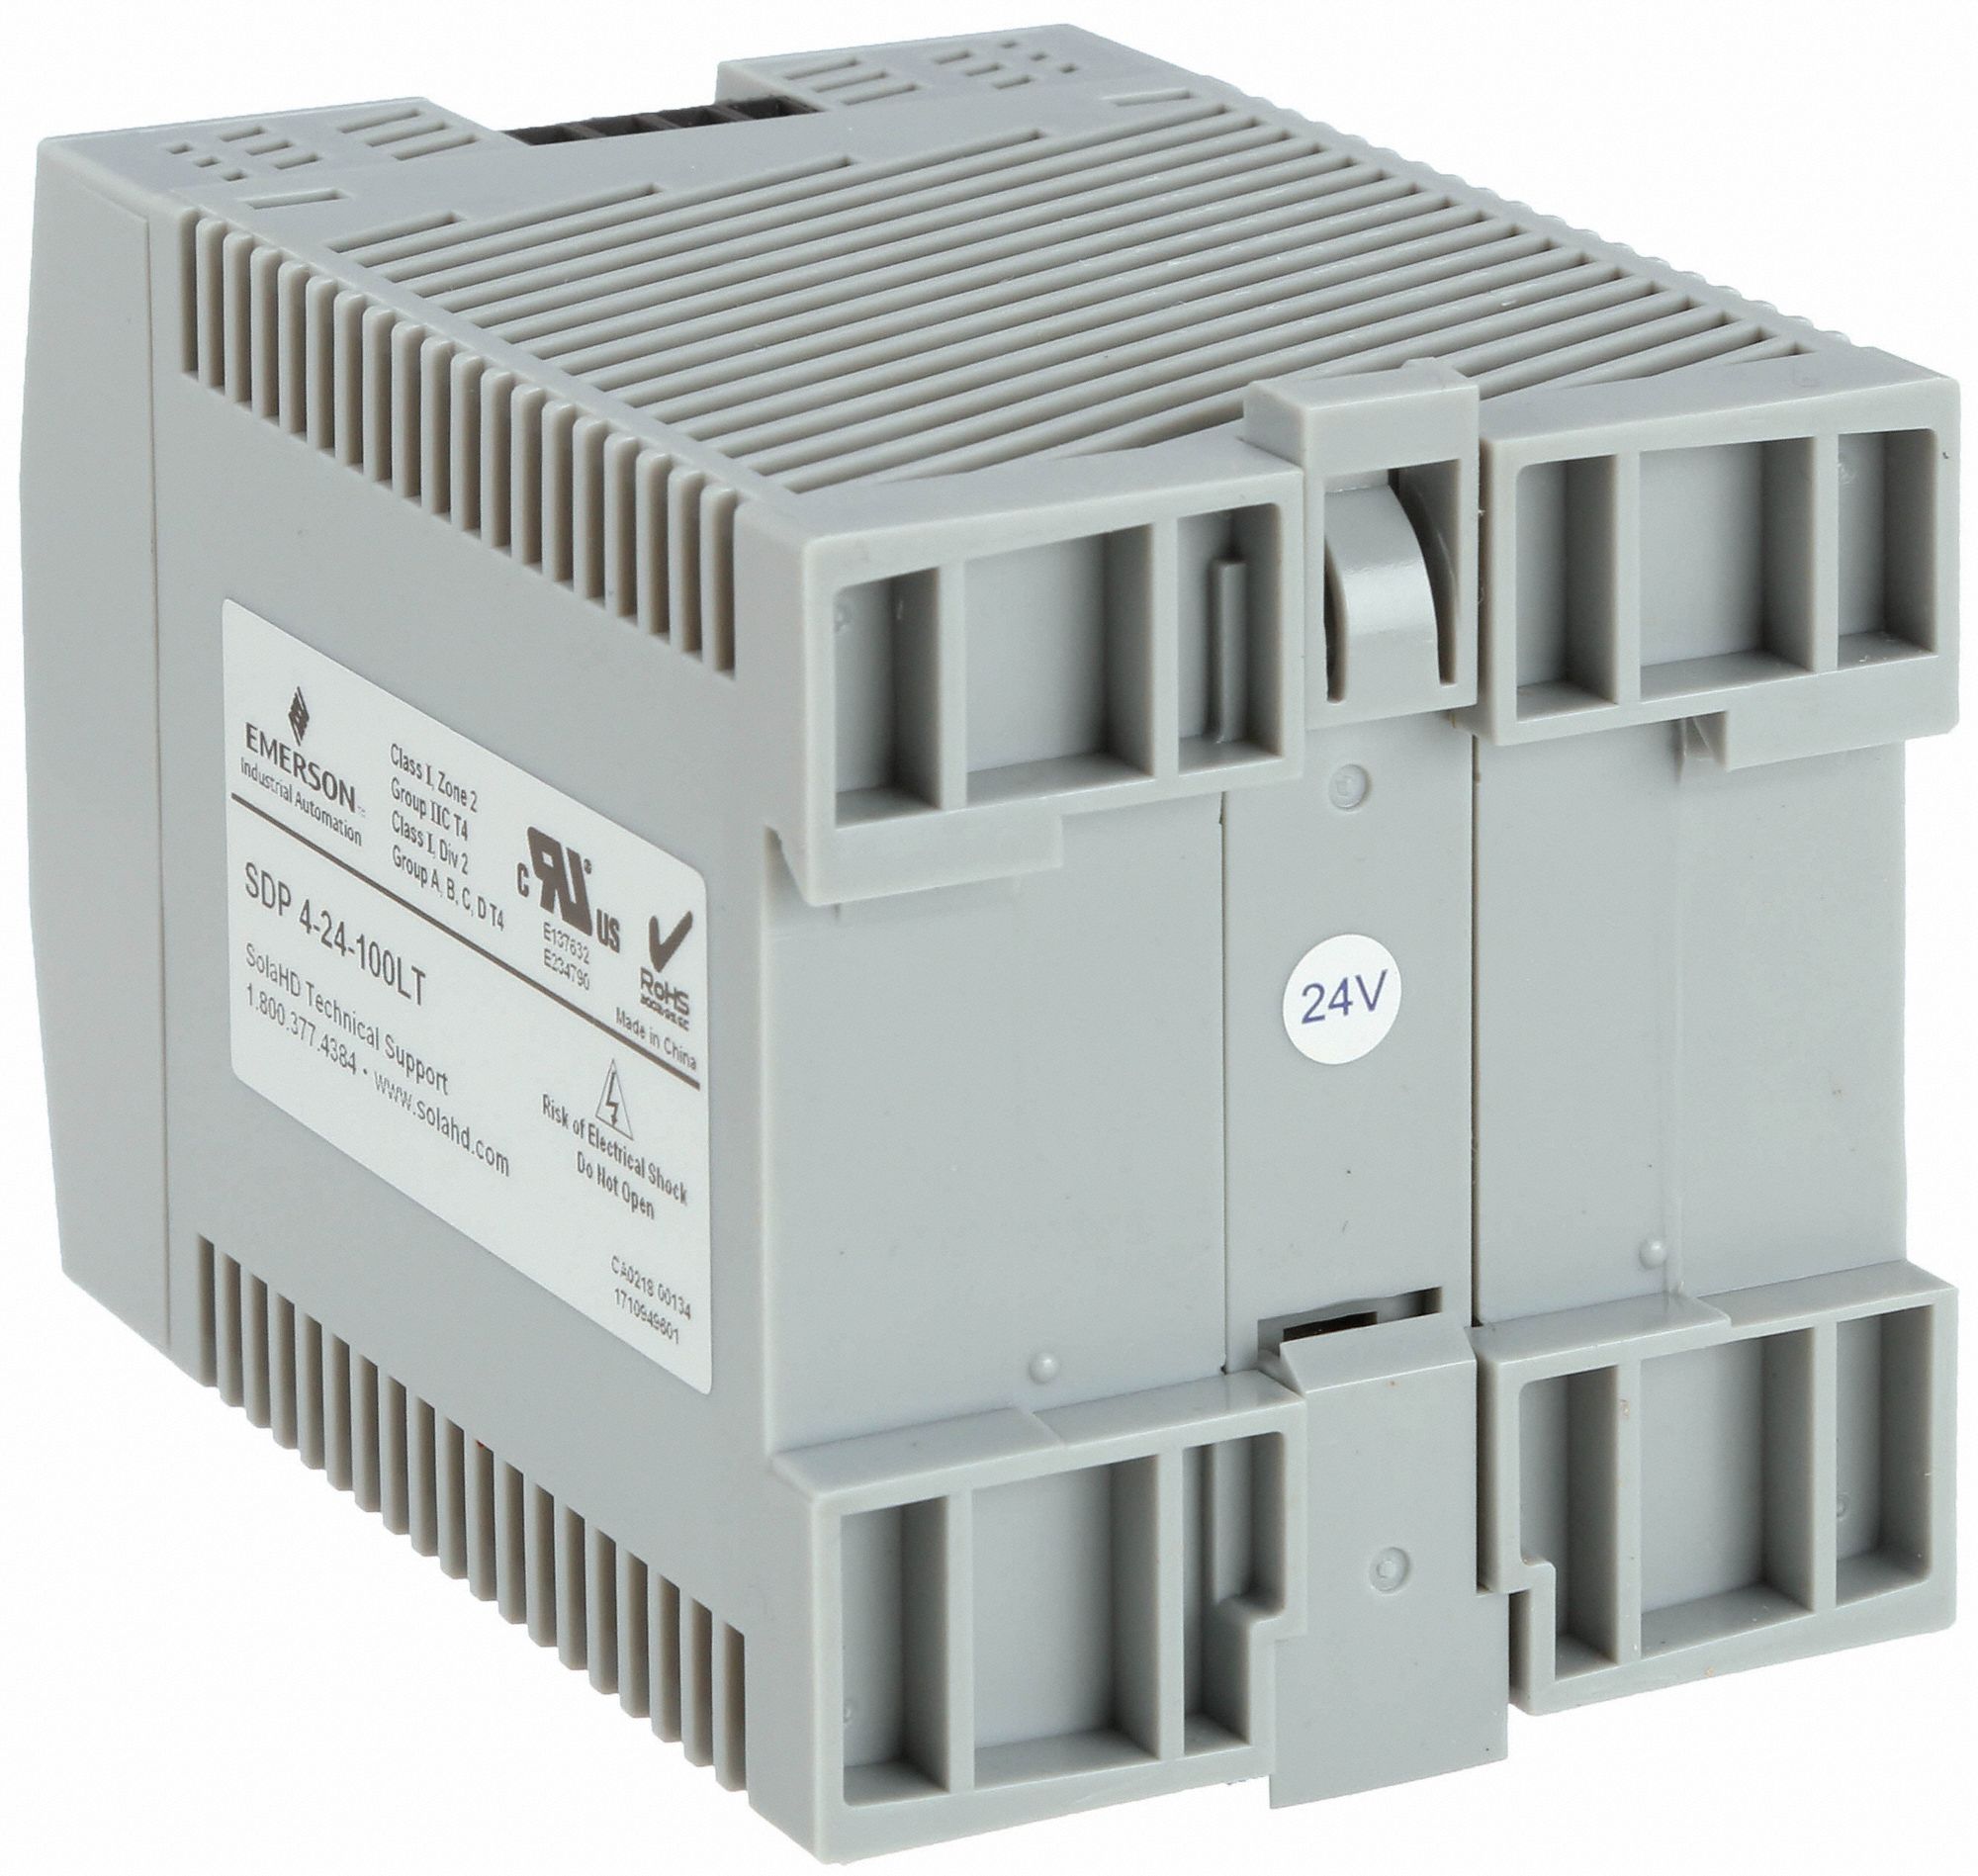 Emerson Sdp1-24-100t Switching Power Supply for sale online 